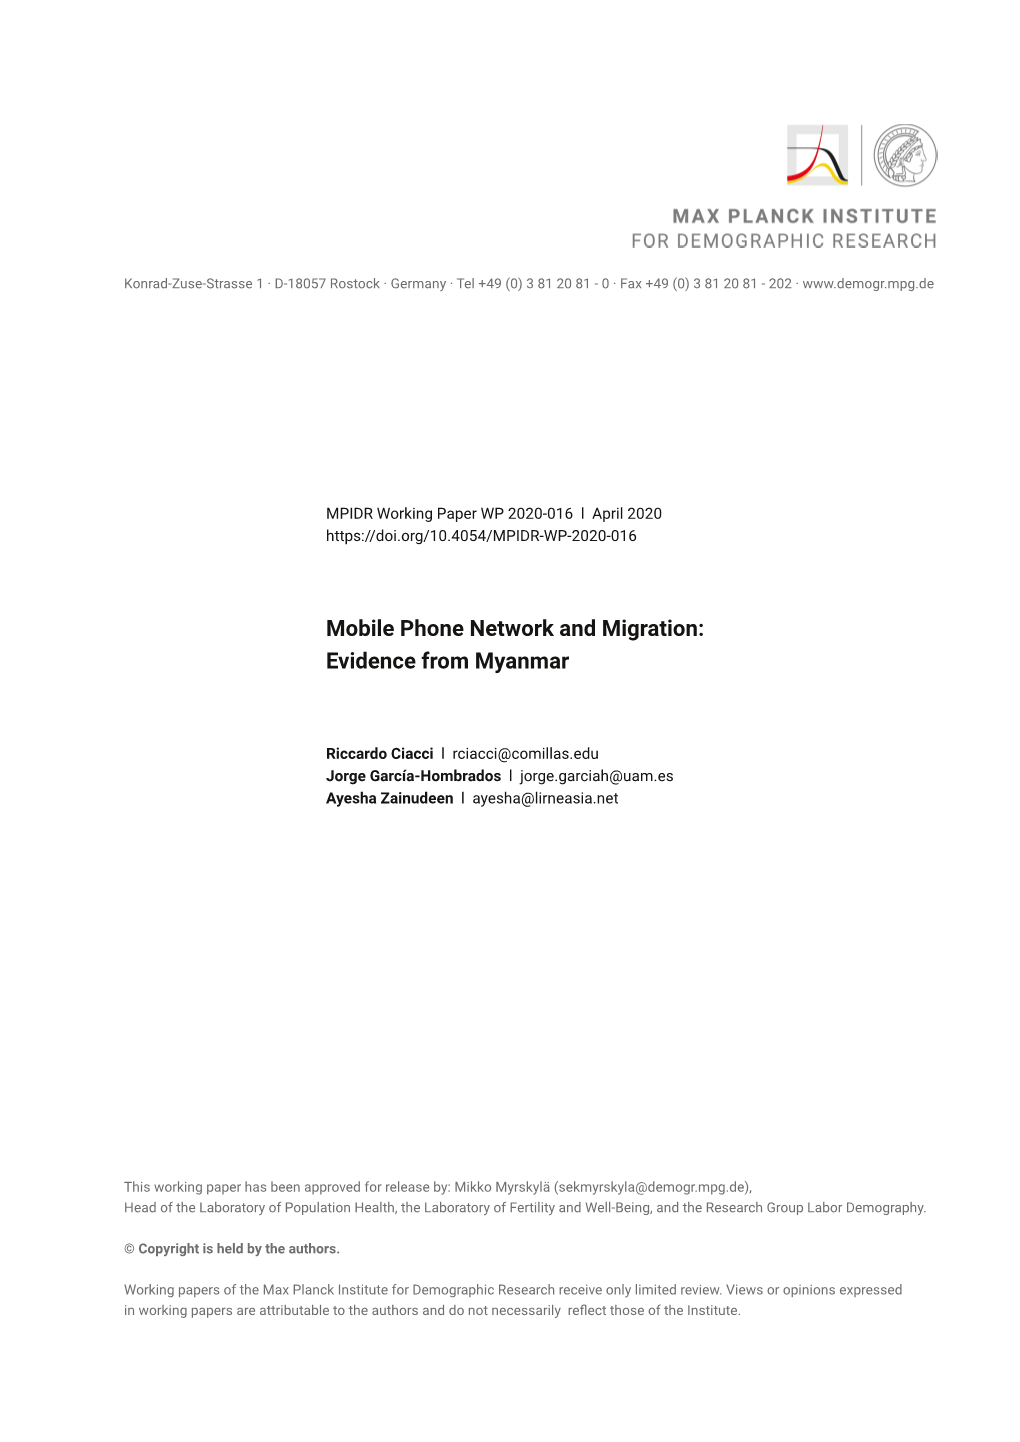 Mobile Phone Network and Migration: Evidence from Myanmar